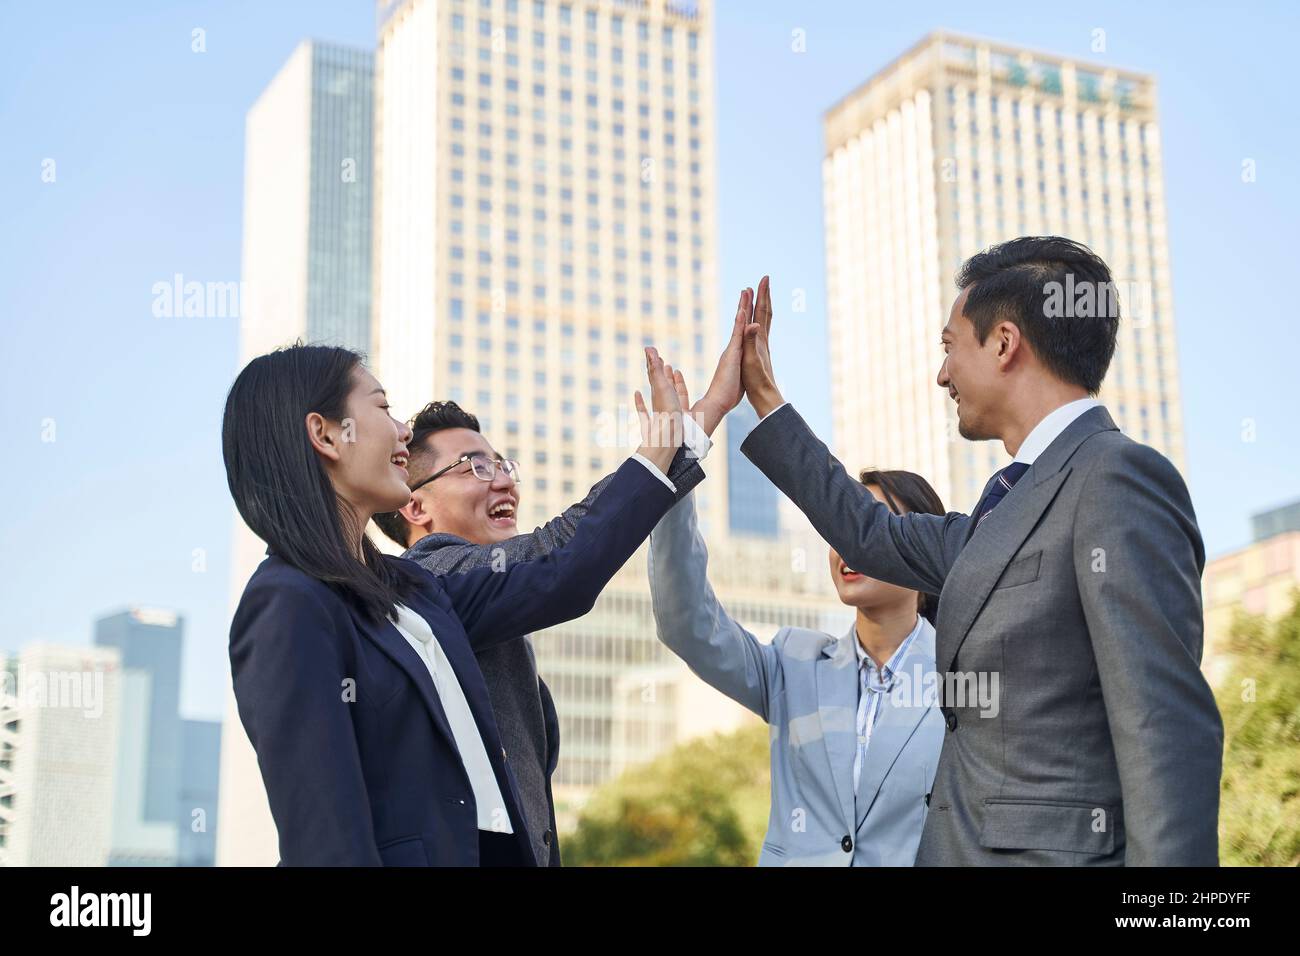 asian business people celebrating success by exchanging high fives Stock Photo